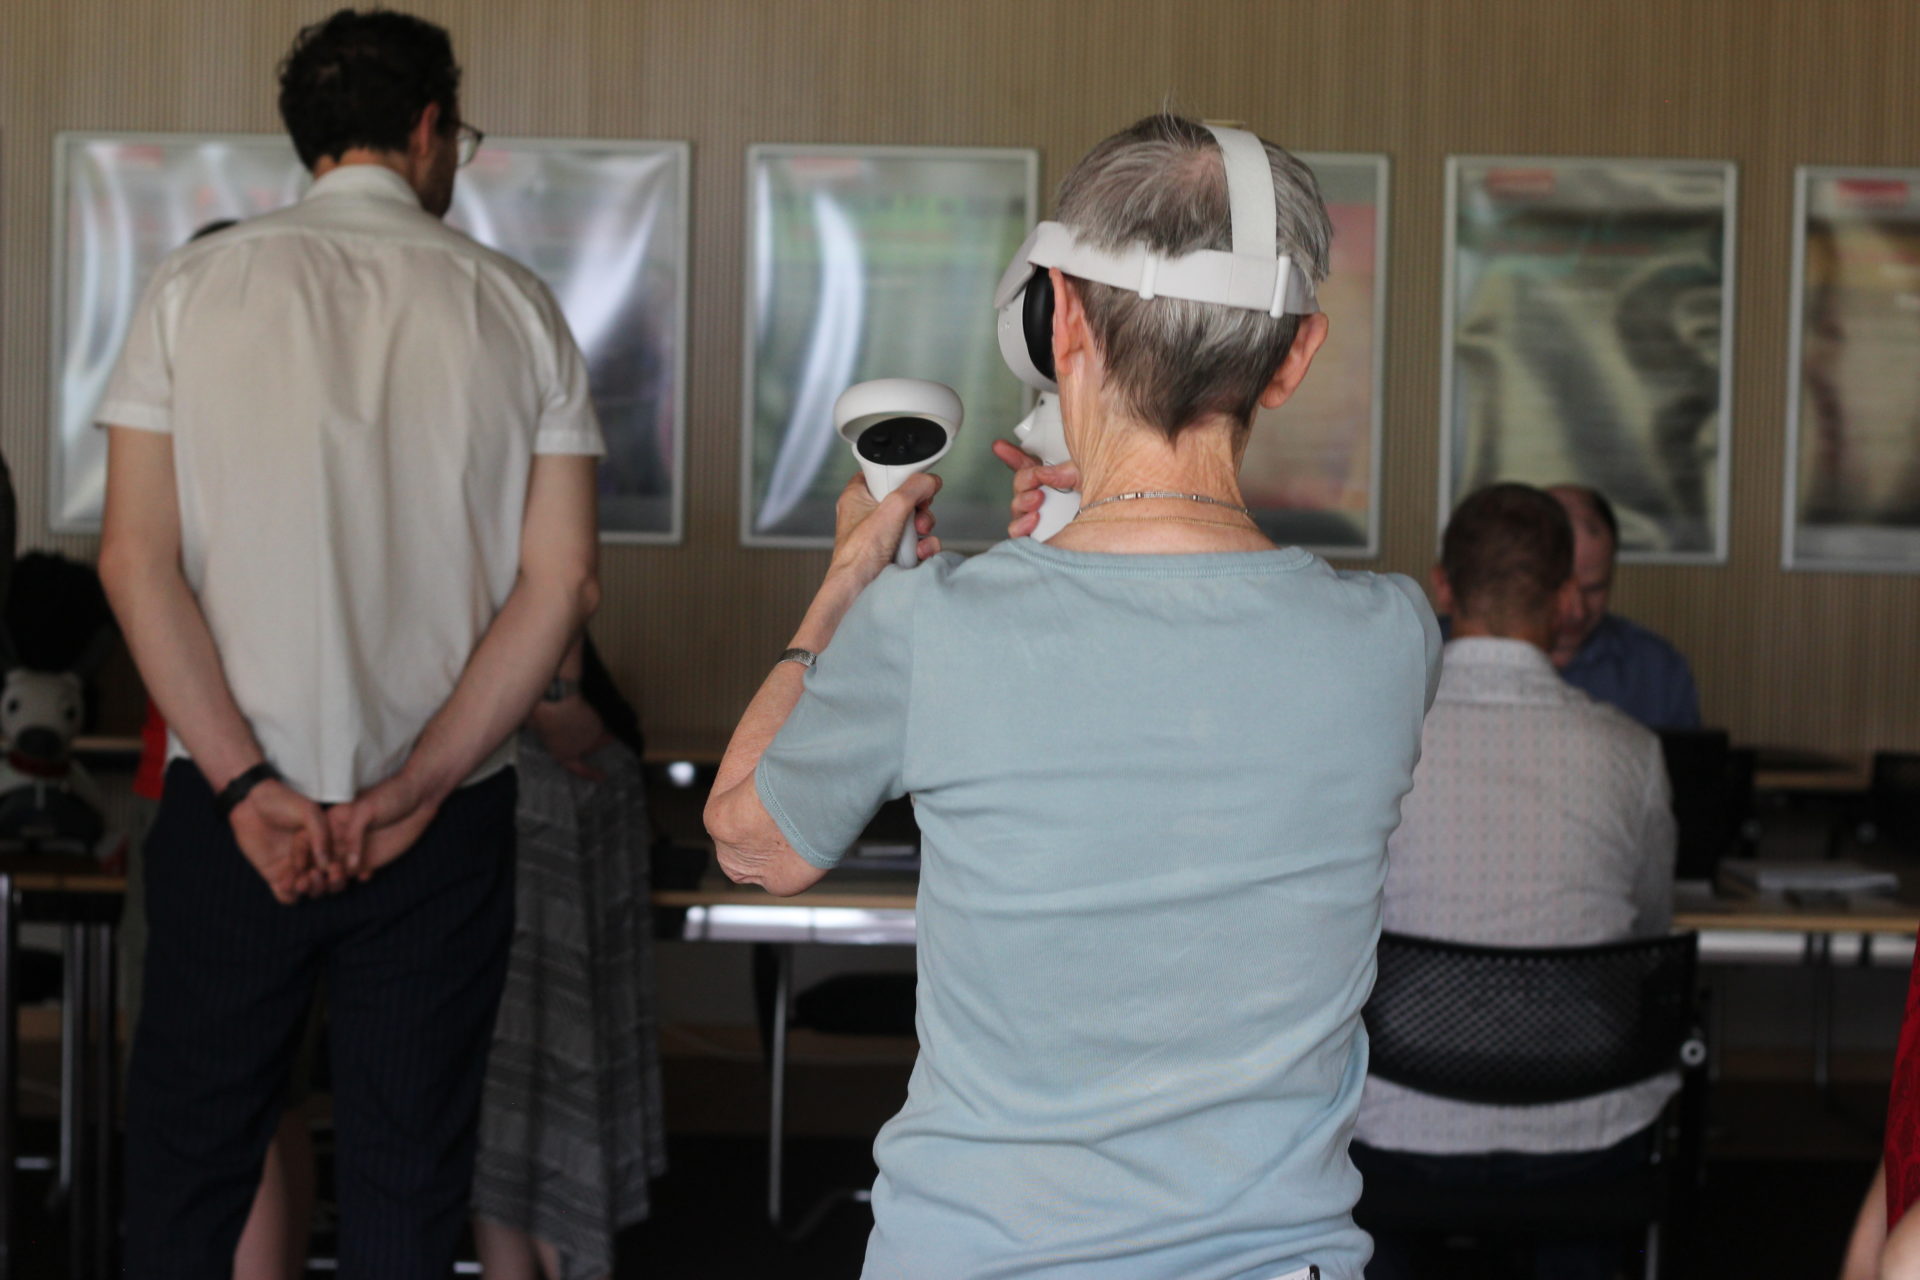 Margrit Shildrick experiences VR telepresence (her back to the camera, Zaki Hussein in the background).